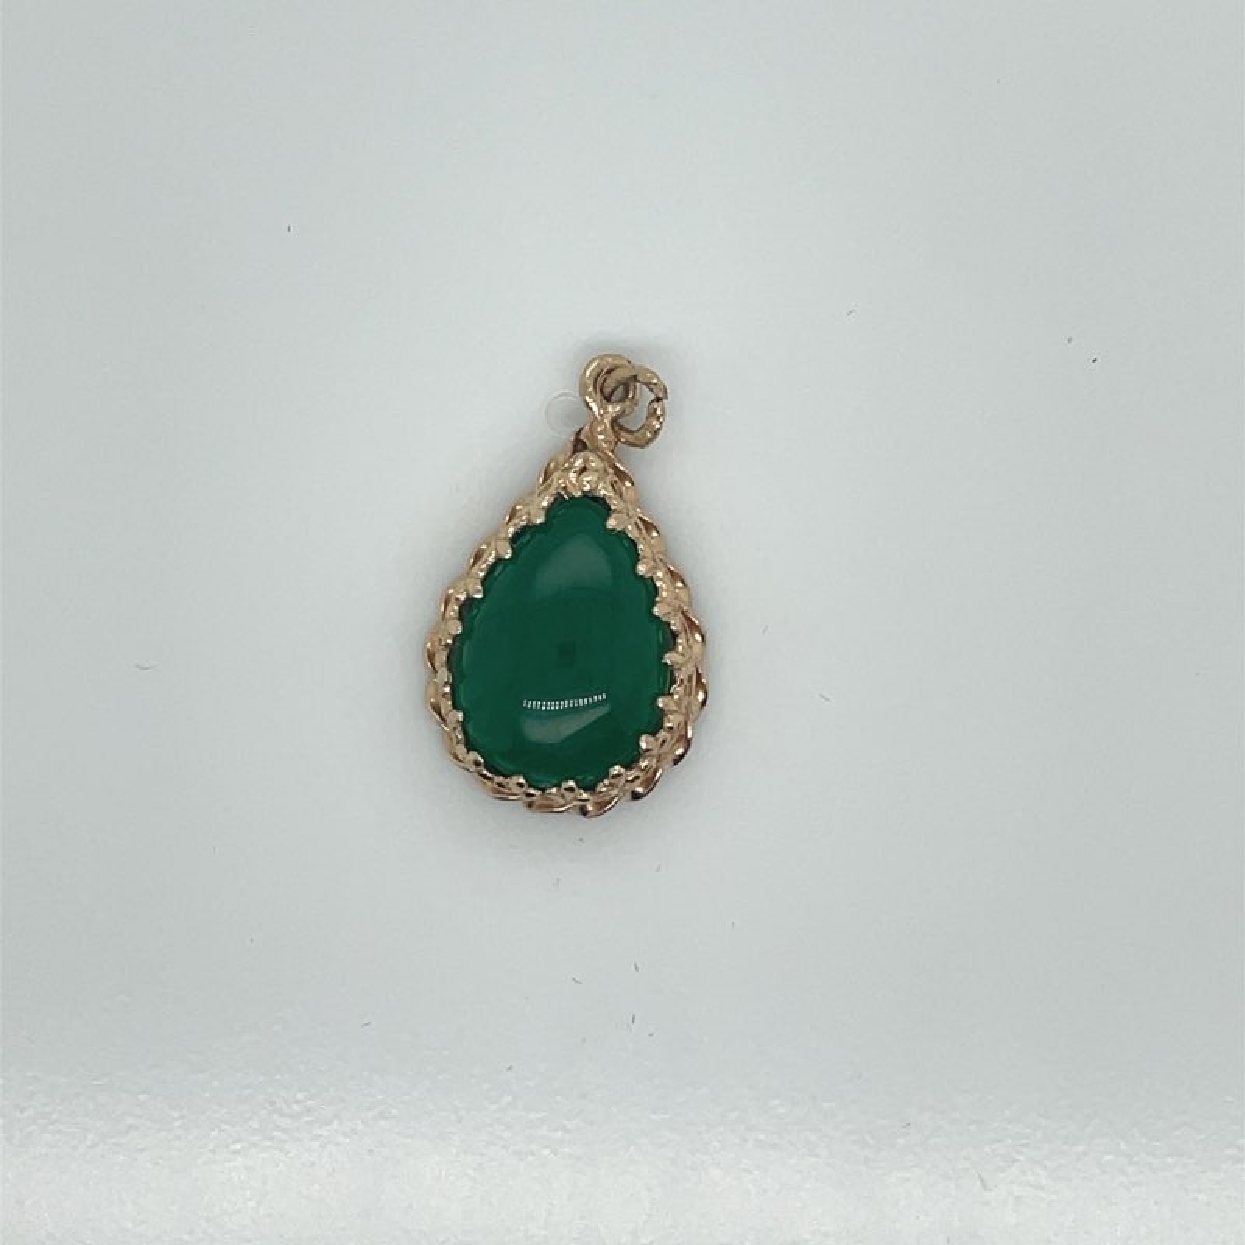 14K Yellow Gold Pear Shaped Jade Pendant with Filigree Detailing